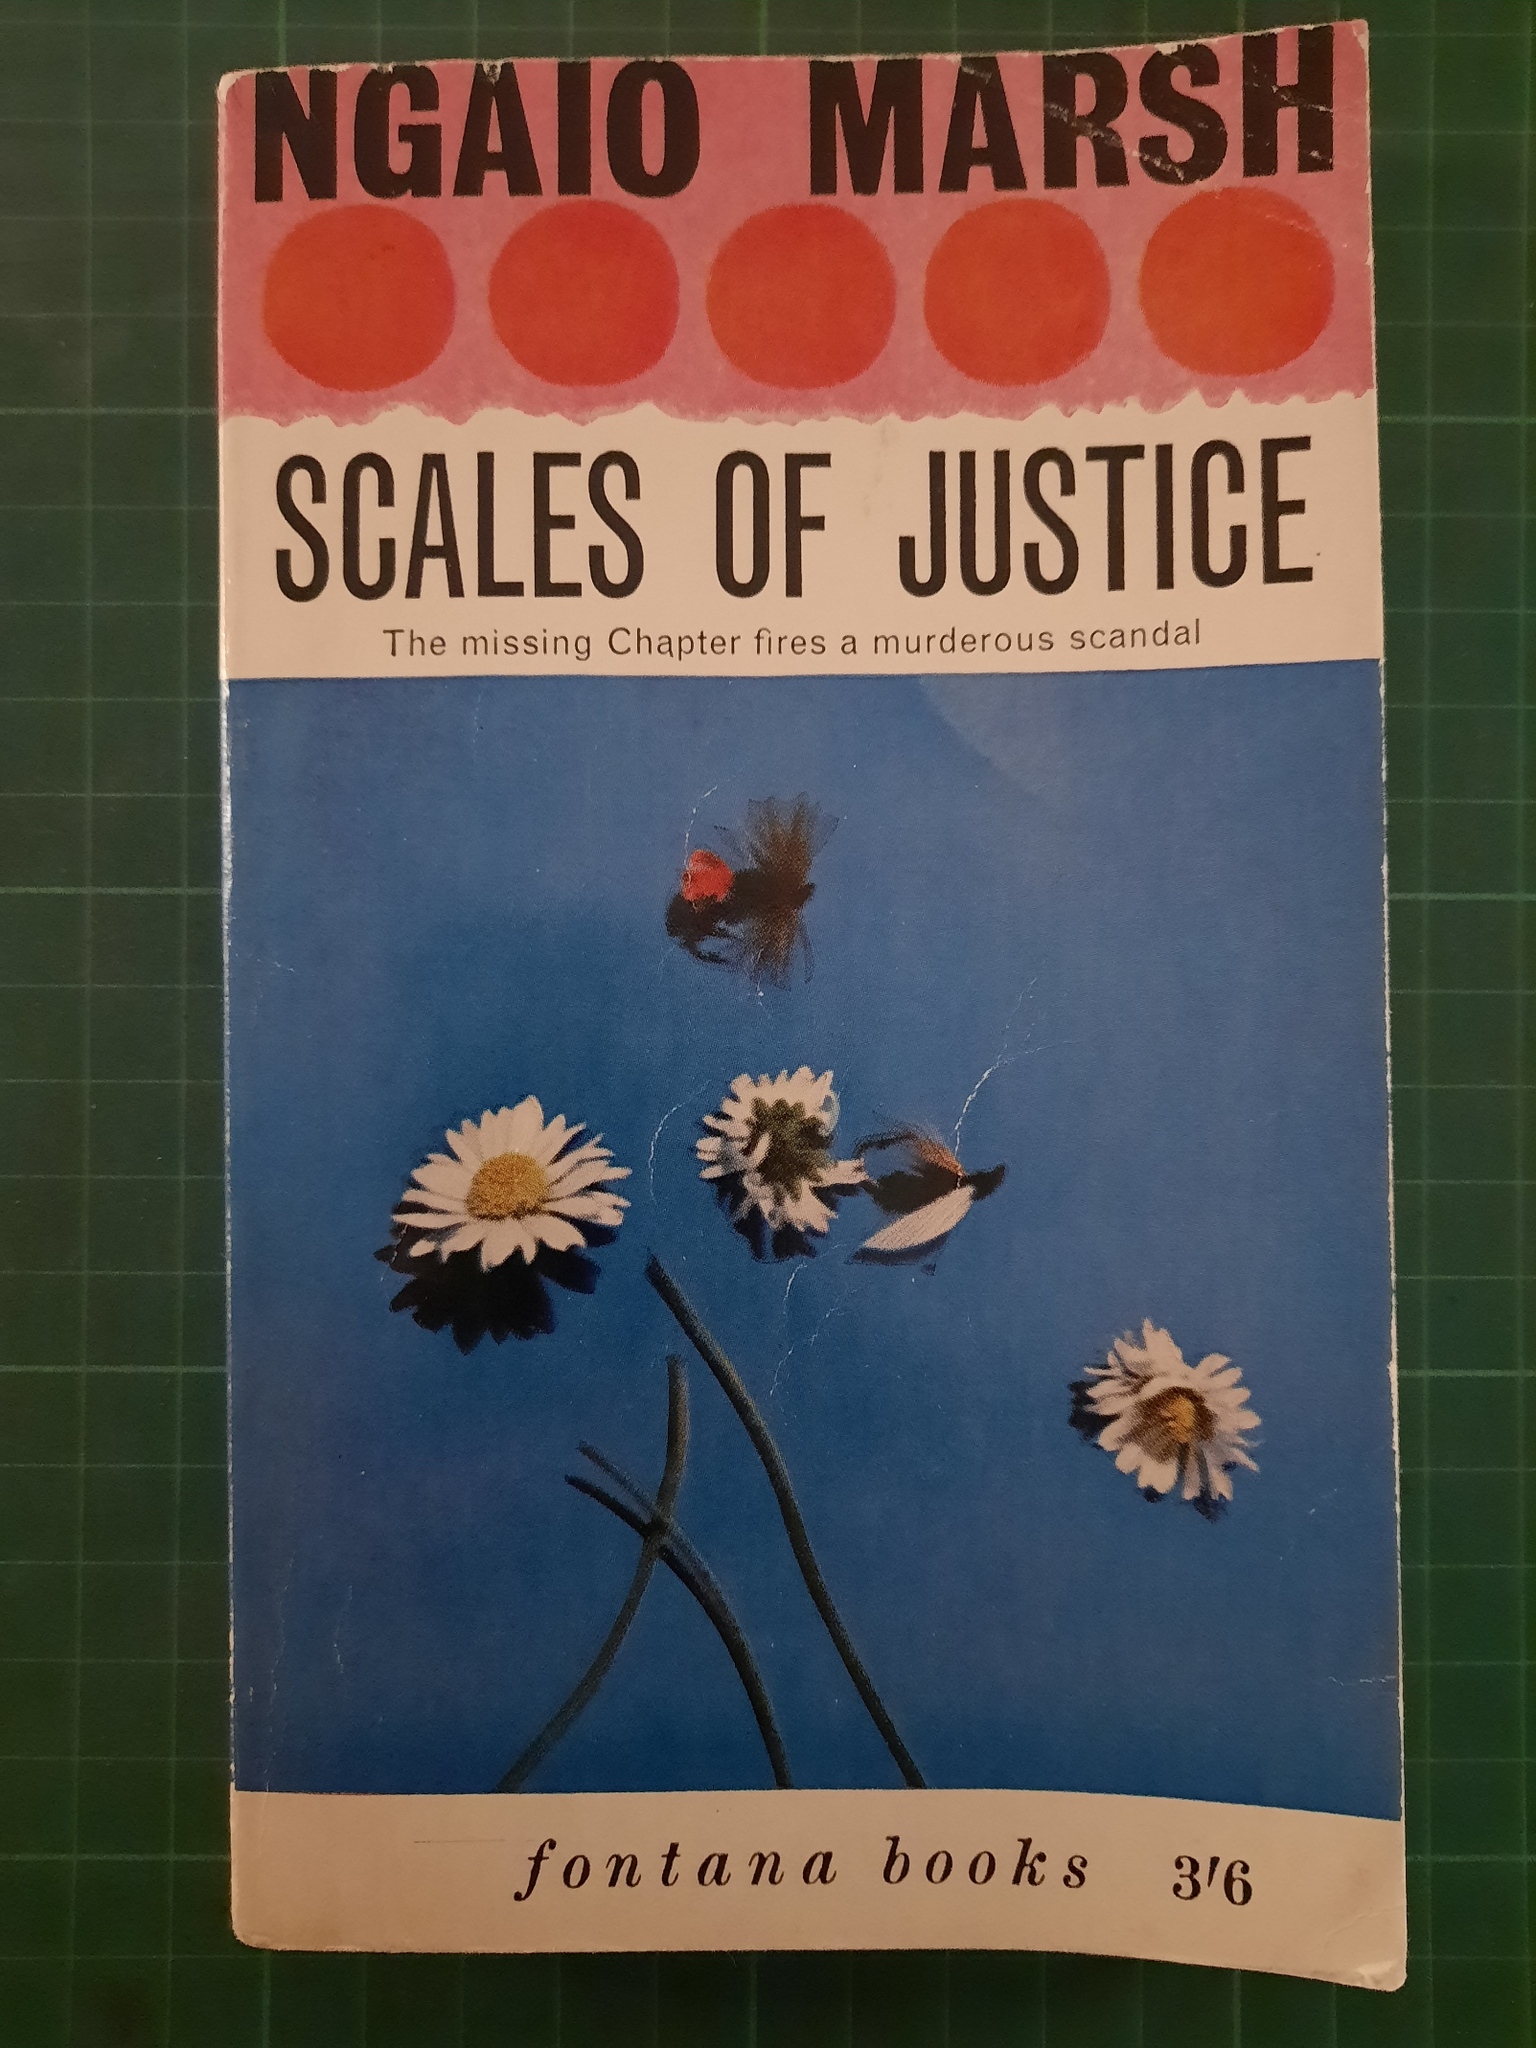 Ngaio Marsh : Scales of justice